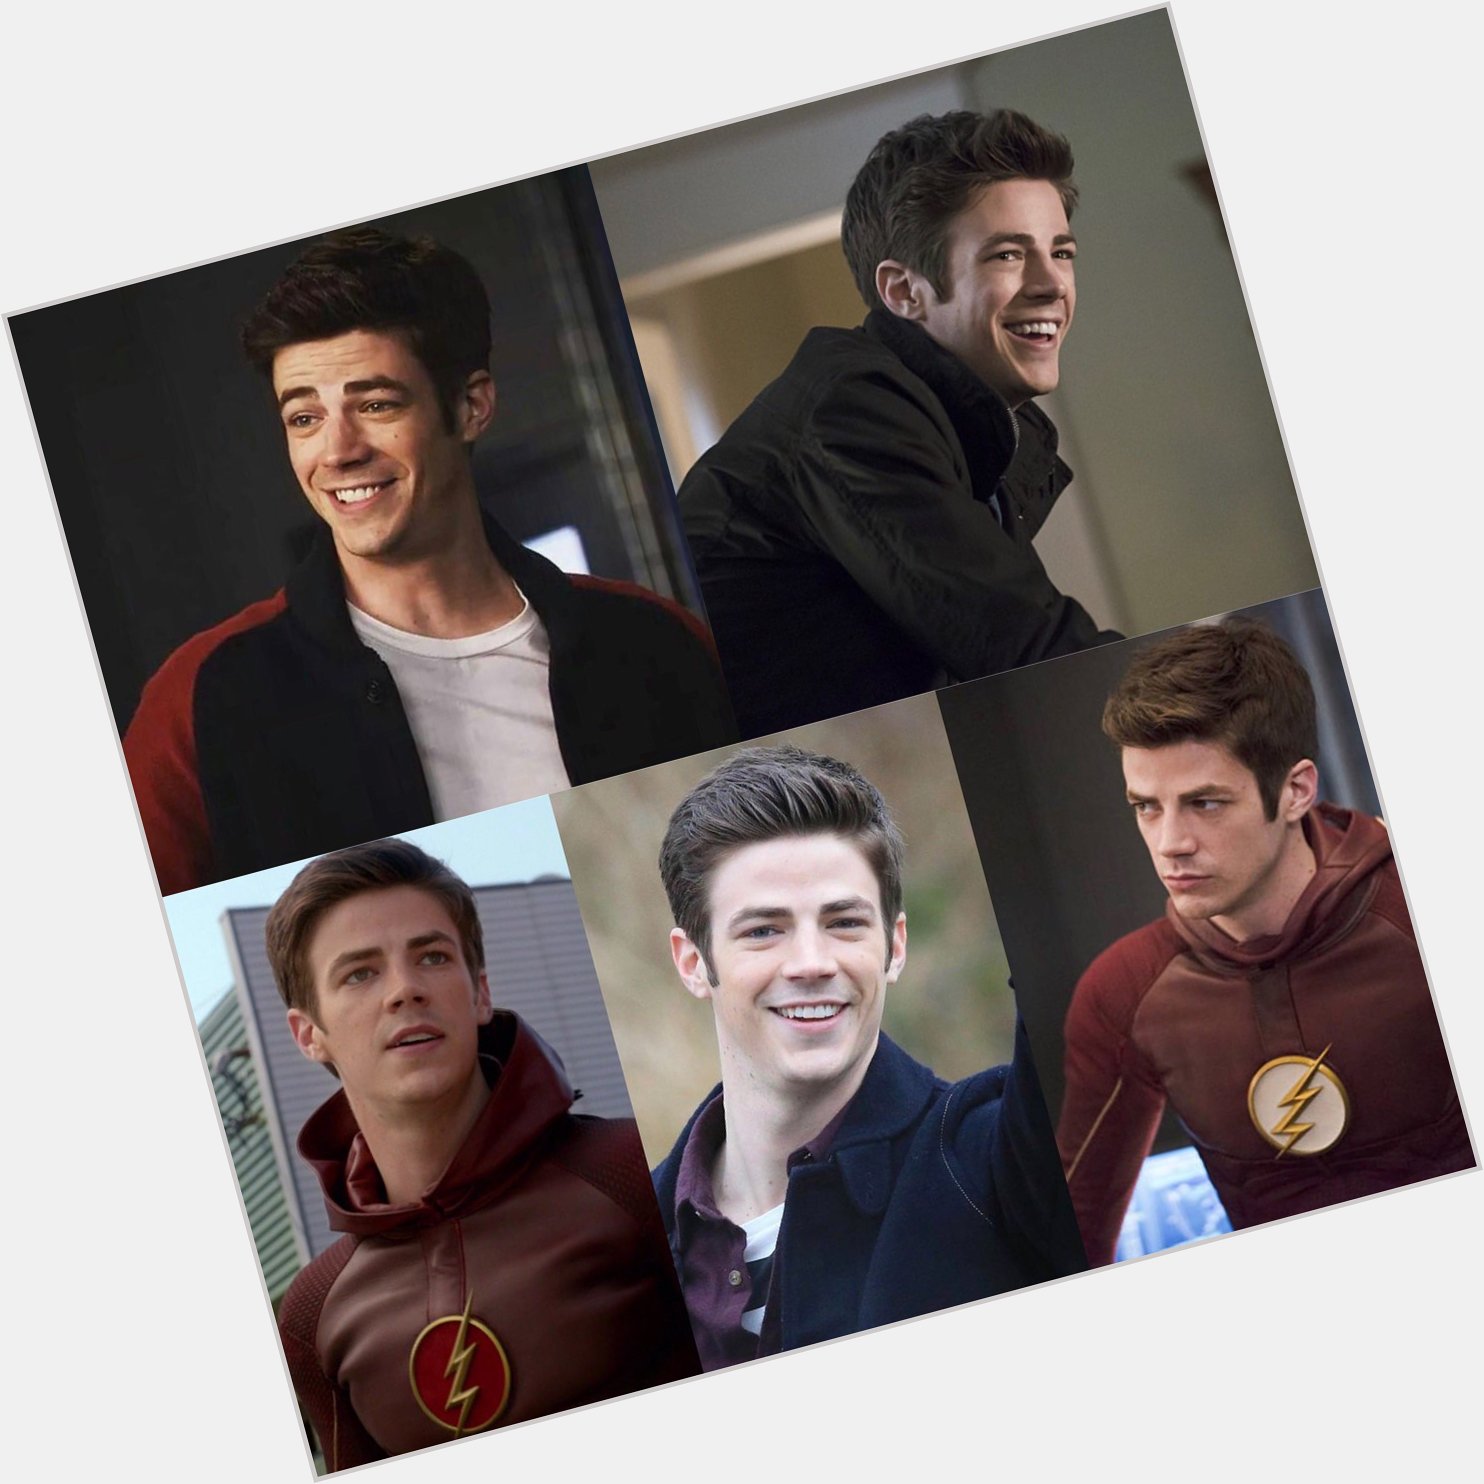 Happy Birthday to one of my favorite actors, Grant Gustin!  